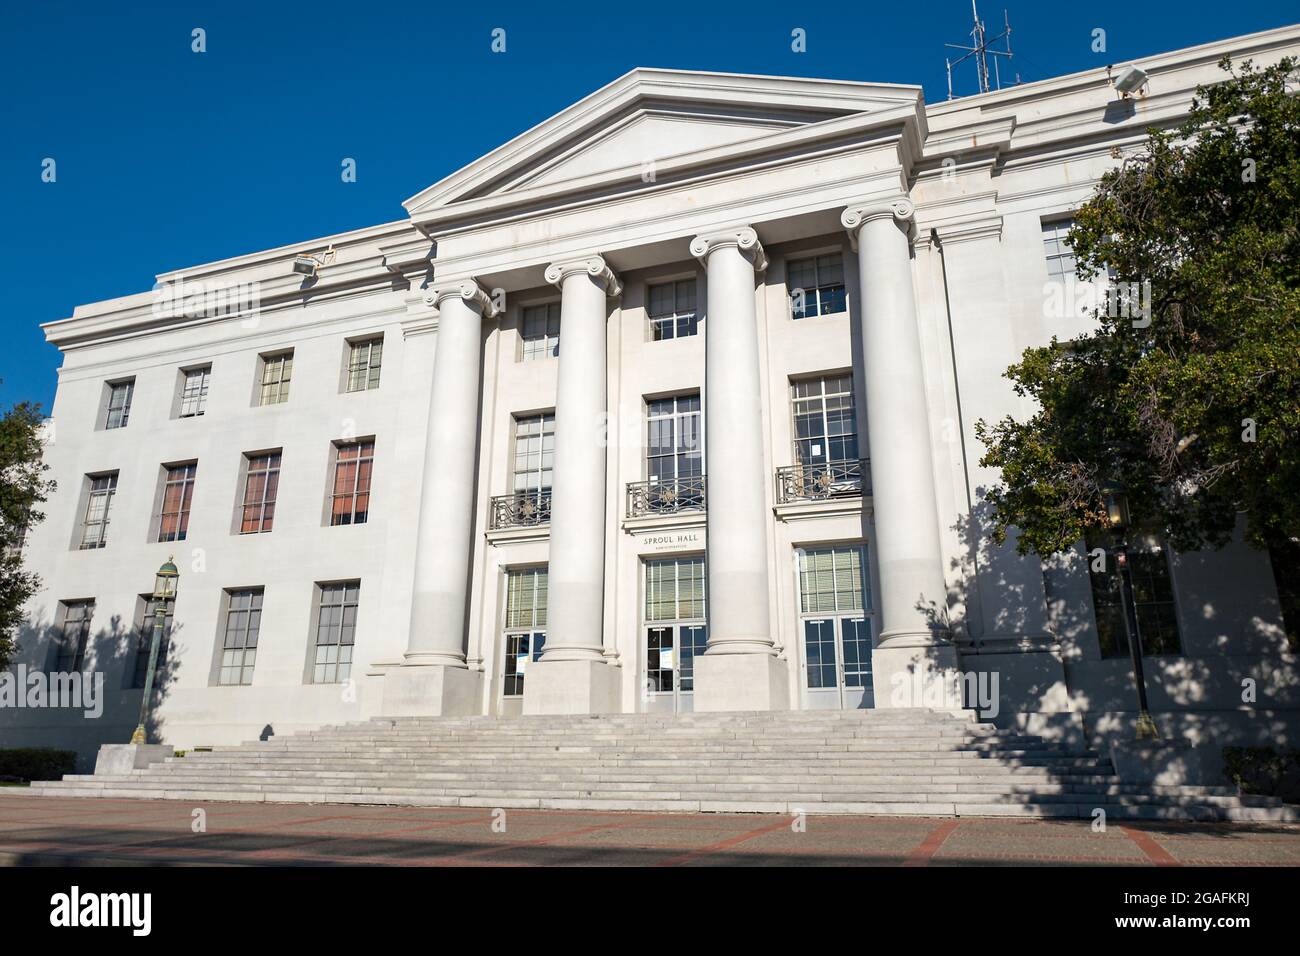 USA. 06th Oct, 2017. Facade of Sproul Hall, the administrative building at UC Berkeley in Berkeley, California, which is known for being the epicenter of a variety of political protest movements, including the Free Speech movement, Occupy Berkeley, and 1960s protests against the Vietnam War, October 6, 2017. (Photo by Smith Collection/Gado/Sipa USA) Credit: Sipa USA/Alamy Live News Stock Photo